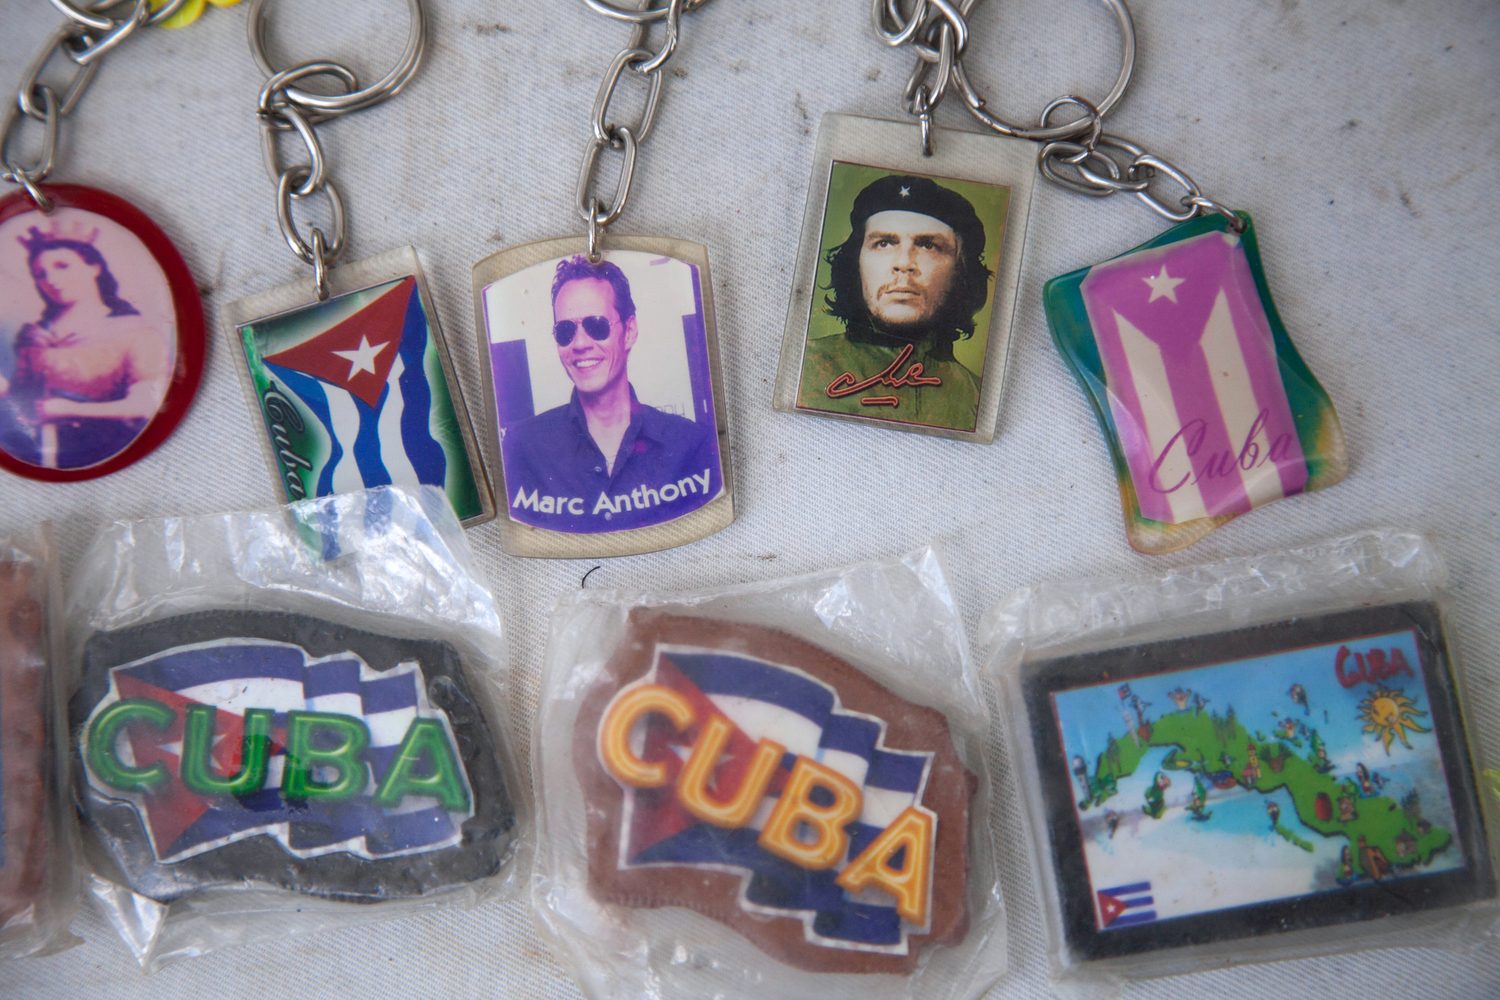  Cuban memorabilia, including the face of Che Guevara, is sold by local vendors at Gran Piedra in the National Park of Baconao in Cuba. 